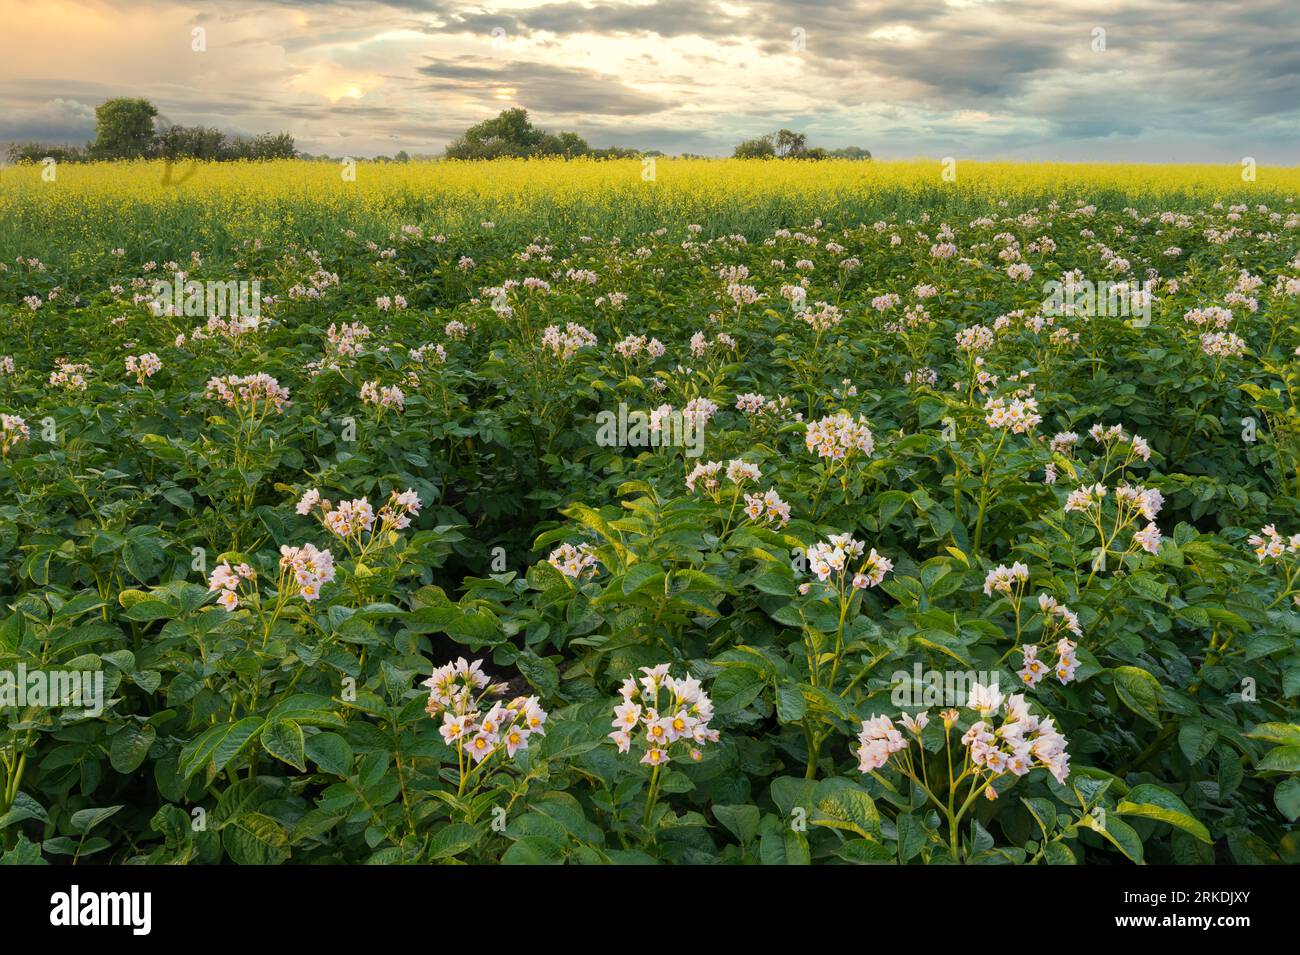 A blooming potato field with white blossoms at sunset near Winkler, Manitoba, Canada. Stock Photo